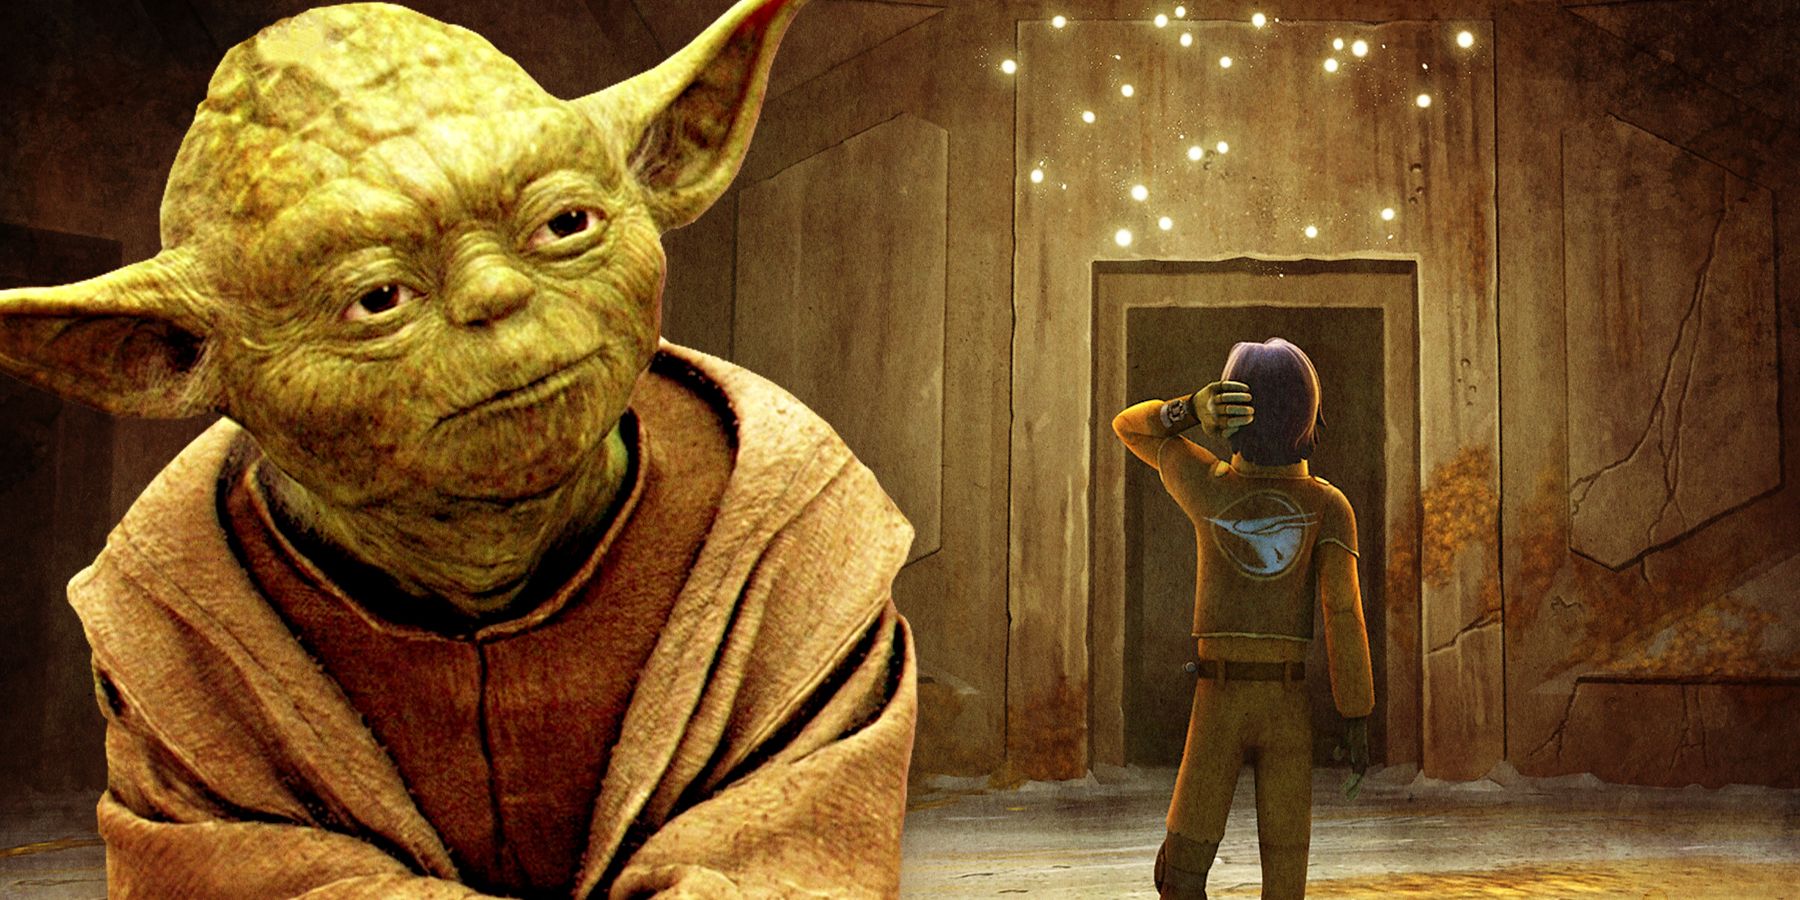 Who Is The Oldest Jedi In Star Wars?